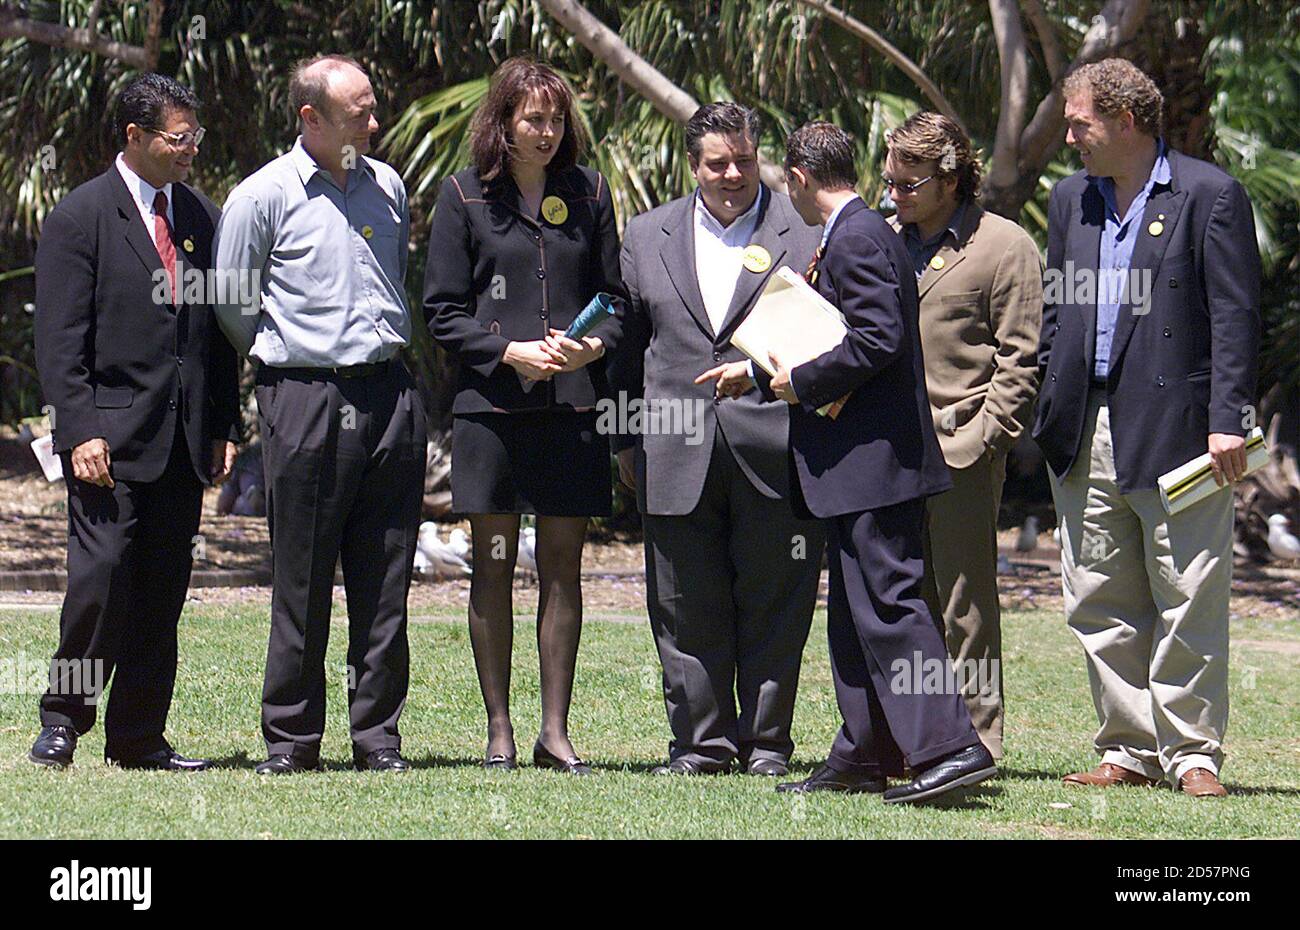 An advisor positions (L-R) Aboriginal Senator Aden Ridgeway, Reverend Tim Costello, Australian netball captaion Liz Ellis, comedian Mikey Robbins, actor Jeremy Sims and showbusiness entrepreneur Steve Vizard for a group photo after they held a media briefing to launch the Yes Ambassadors for the Republic at Sydney's First Fleet Park October 28. The group, which represents more than 300 celebraties, sports stars and other famous Australians, told journalists it was important for Australians to know that many of their fellow citizens, some of who have represented their nation overseas and have a Stock Photo